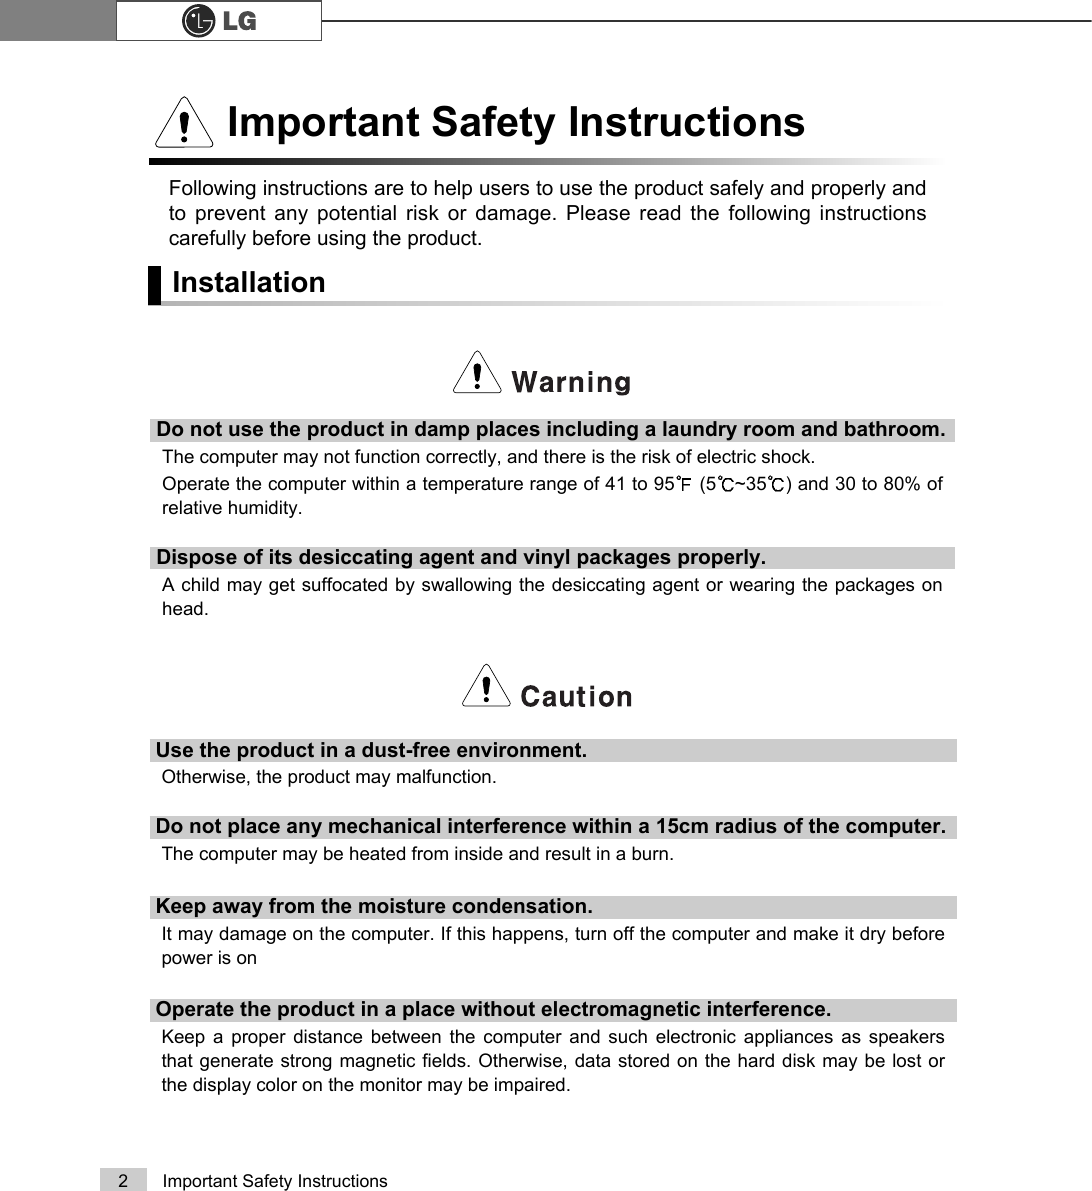 2 Important Safety InstructionsFollowing instructions are to help users to use the product safely and properly andto prevent any potential risk or damage. Please read the following instructionscarefully before using the product.InstallationImportant Safety InstructionsDo not use the product in damp places including a laundry room and bathroom. The computer may not function correctly, and there is the risk of electric shock.Operate the computer within a temperature range of 41 to 95 (5 ~35 ) and 30 to 80% ofrelative humidity.Dispose of its desiccating agent and vinyl packages properly.A child may get suffocated by swallowing the desiccating agent or wearing the packages onhead.Use the product in a dust-free environment.Otherwise, the product may malfunction.Do not place any mechanical interference within a 15cm radius of the computer.The computer may be heated from inside and result in a burn.Keep away from the moisture condensation.It may damage on the computer. If this happens, turn off the computer and make it dry beforepower is onOperate the product in a place without electromagnetic interference.Keep a proper distance between the computer and such electronic appliances as speakersthat generate strong magnetic fields. Otherwise, data stored on the hard disk may be lost orthe display color on the monitor may be impaired.